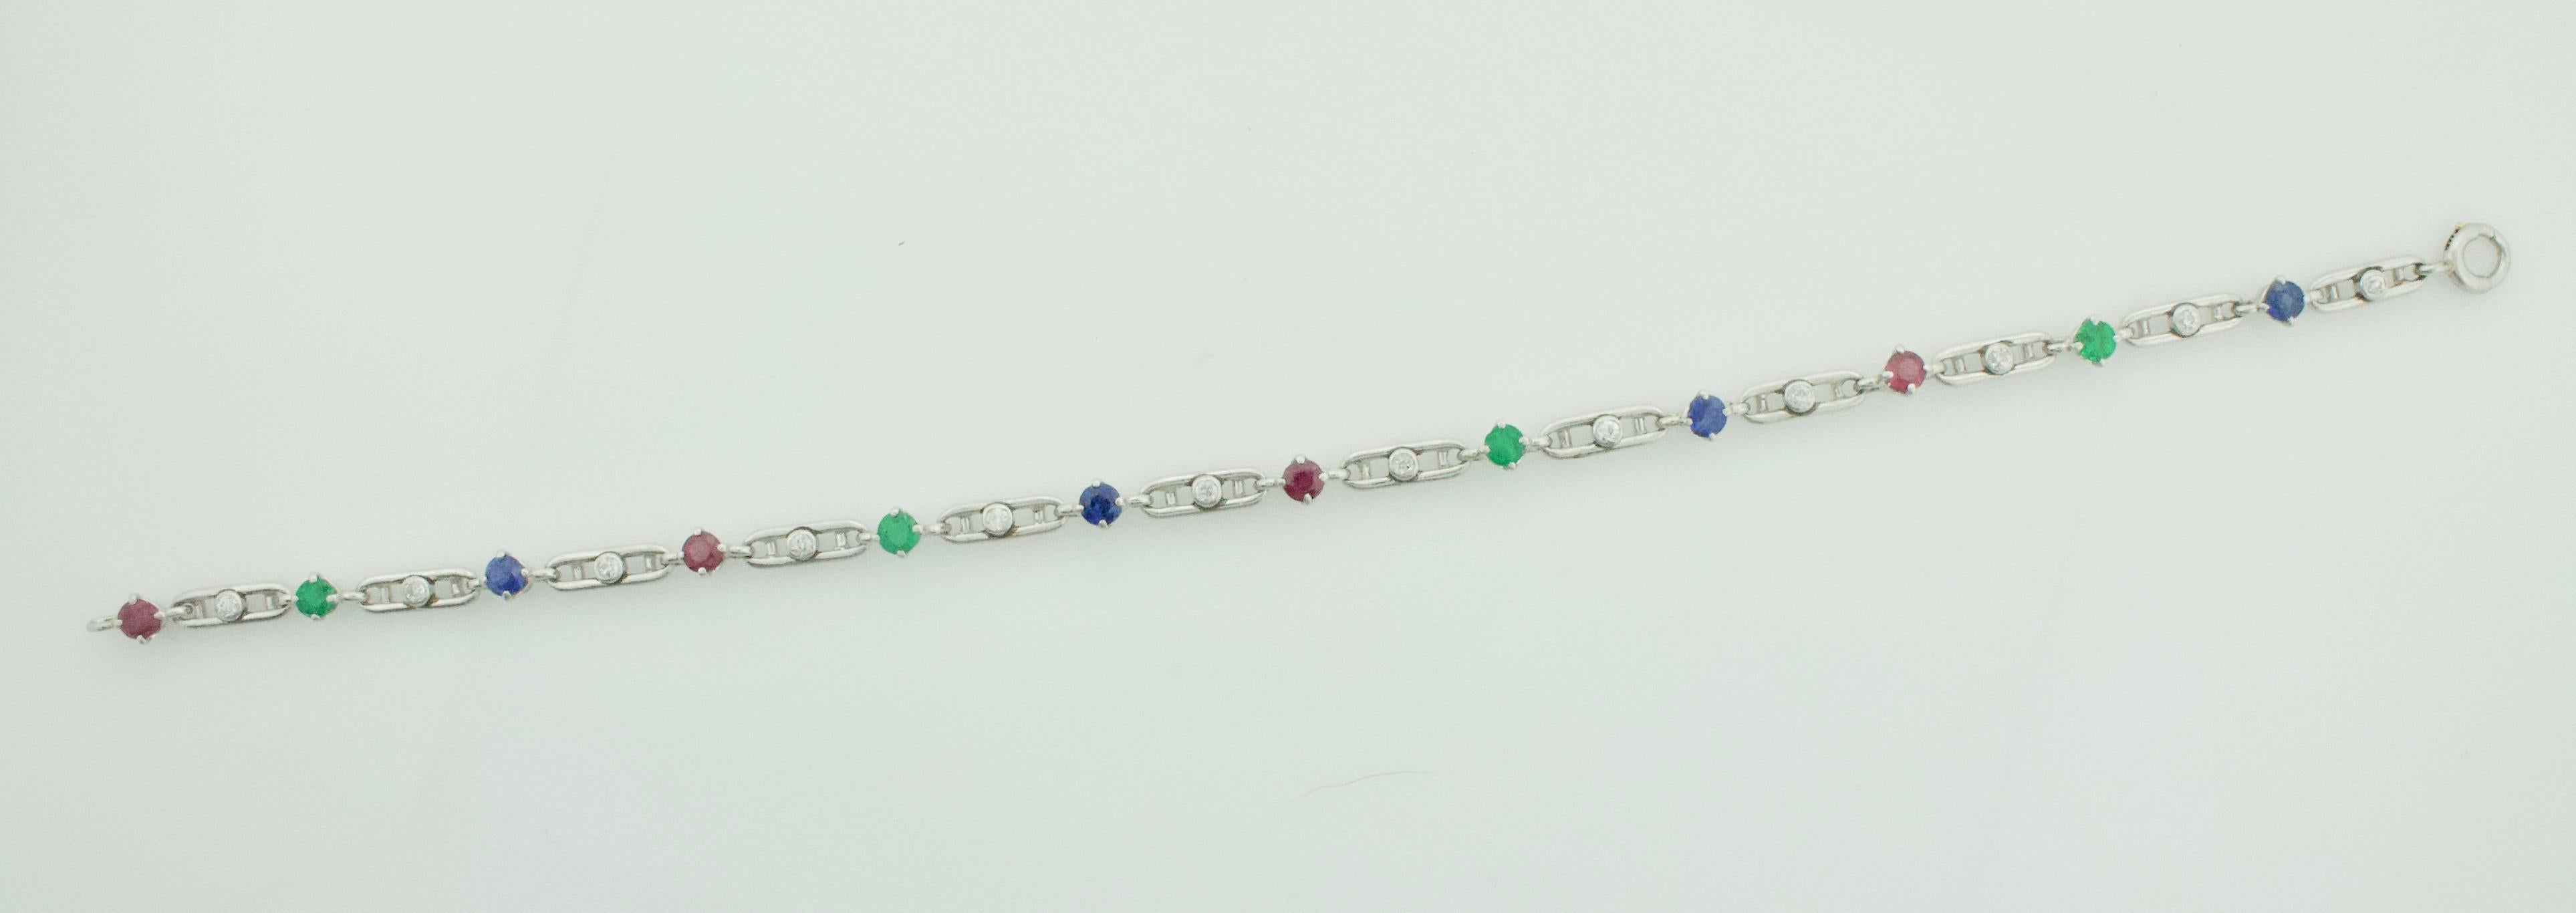 Art Deco 1930's Ruby, Emerald, Sapphire and Diamond Bracelet in Platinum
12 European Cut Diamonds Weighing .35 Carats Approximately [GHI/VVS-SI1]
4 Round Rubies Weighing .50 Carats Approximately 
4 Round Emeralds Weighing .40 Carats Approximately 
4